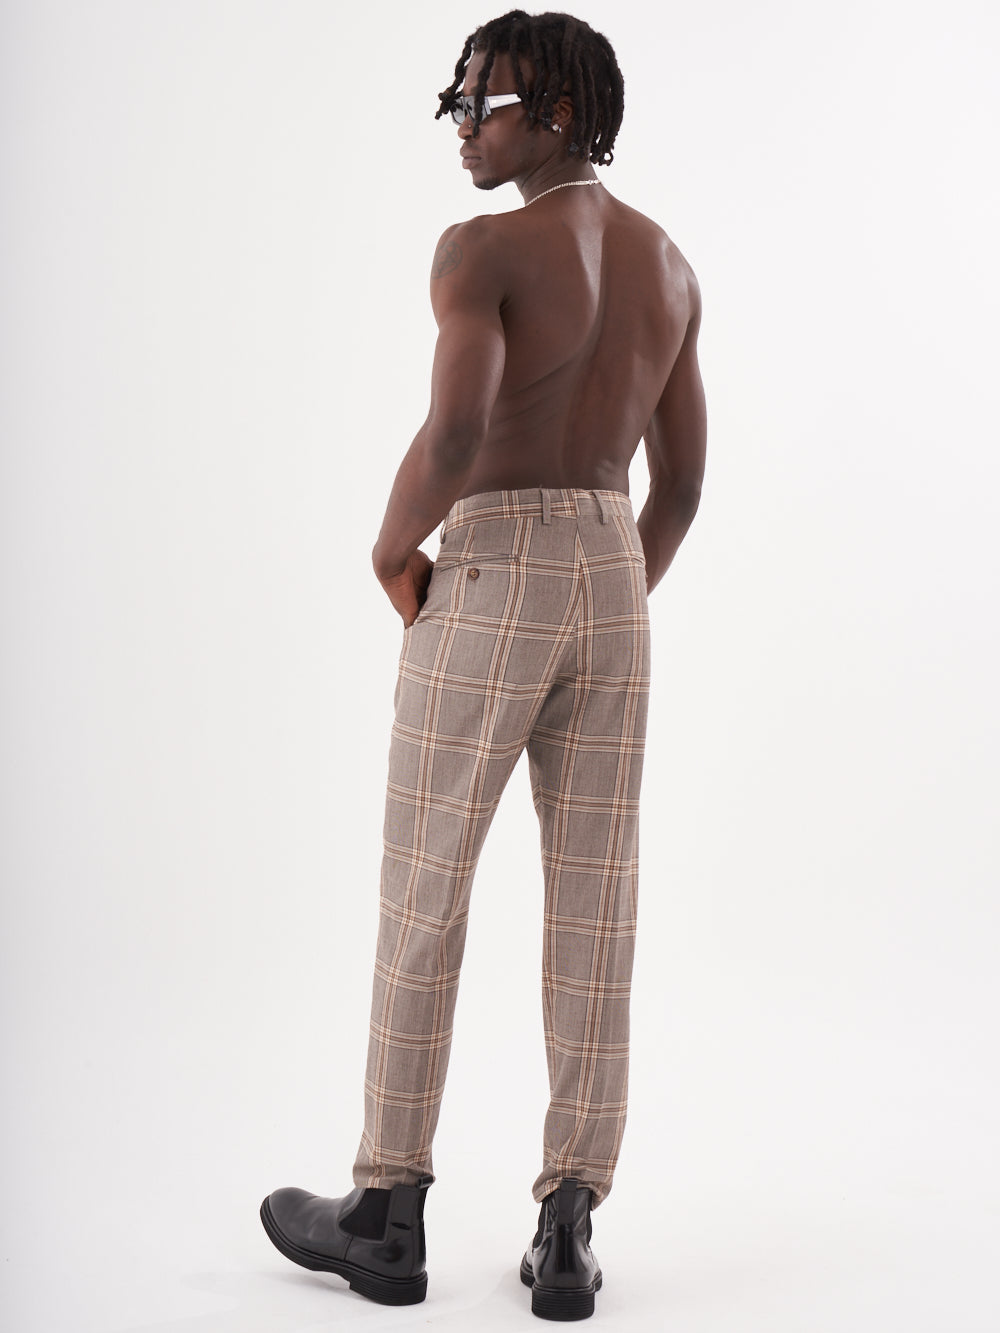 The back of a man wearing slim-fit ROOK PANTS.